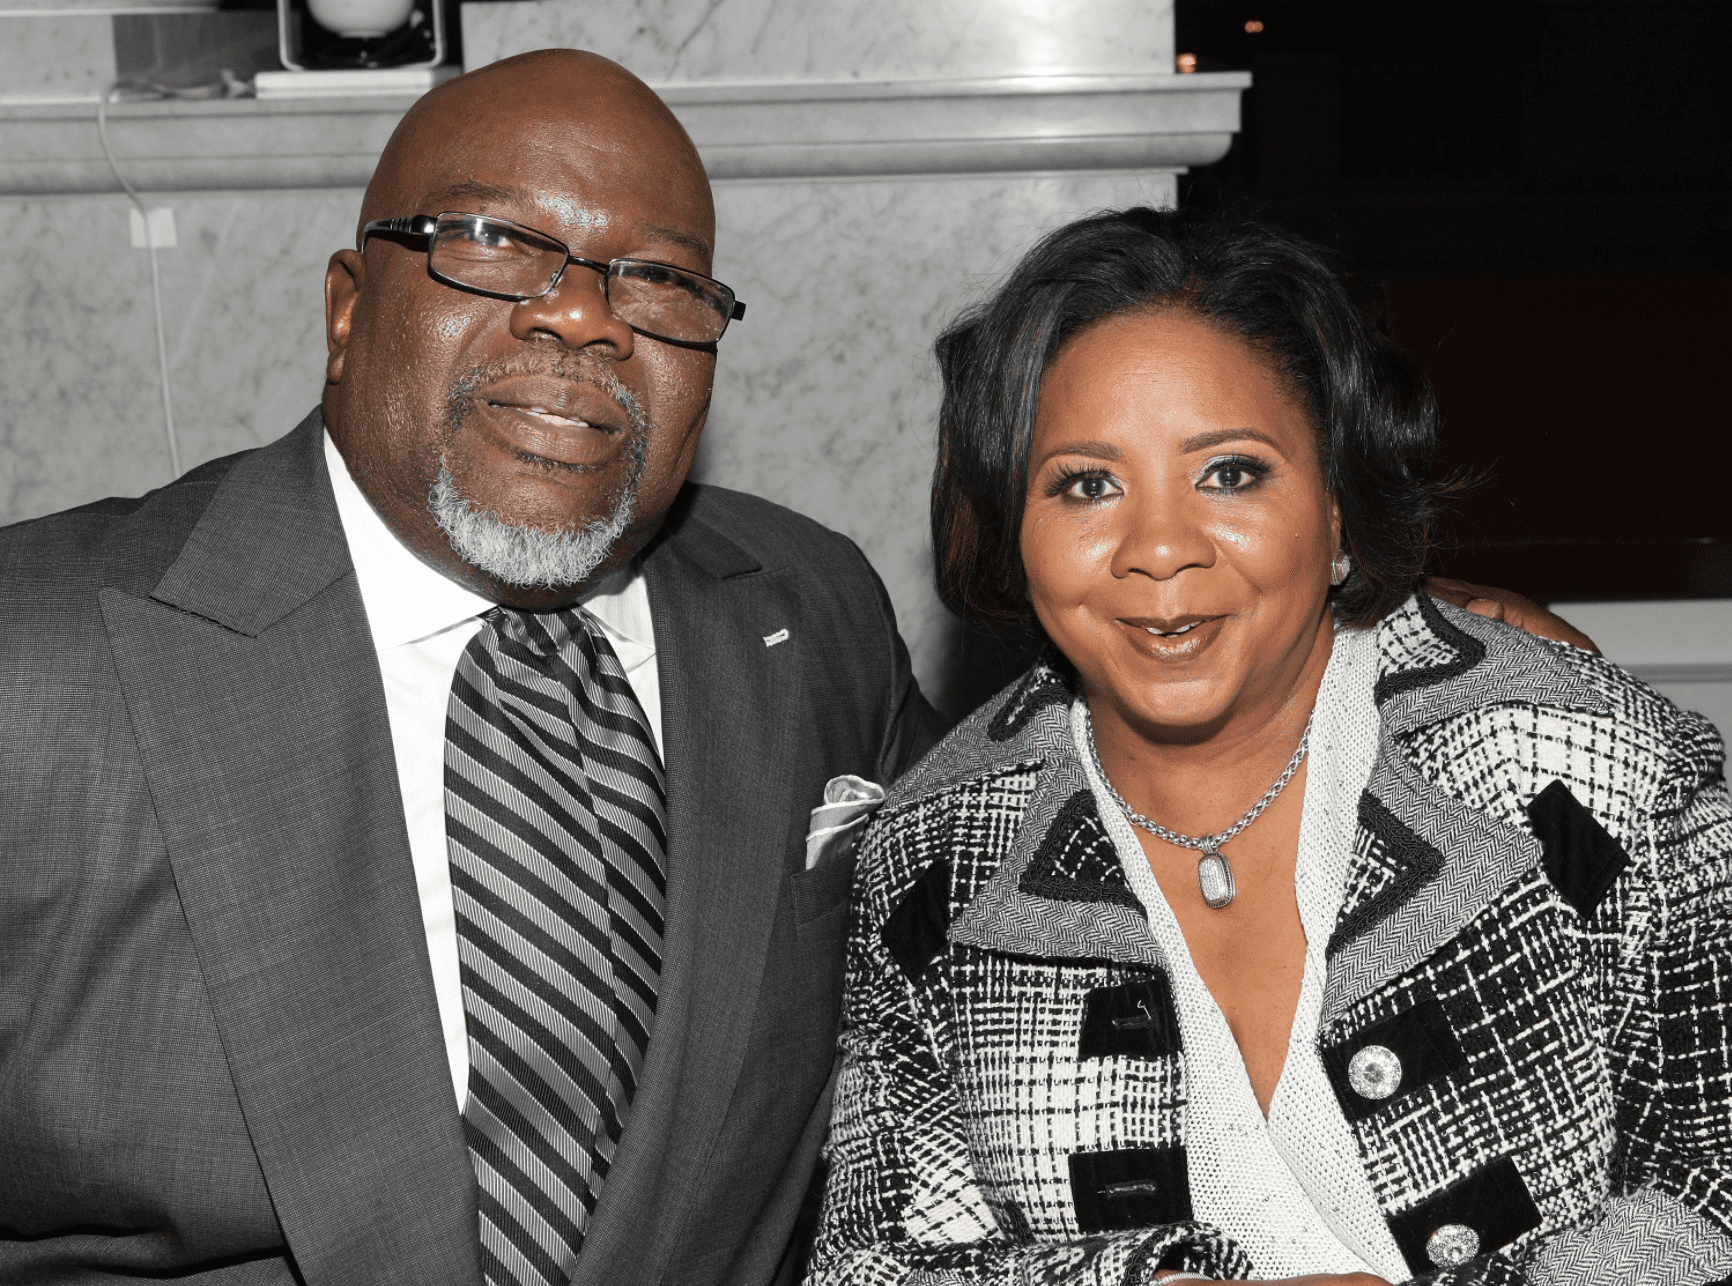 Bishop T. D. Jakes and his wife Serita Jakes at the BET Honors 2013 in Washington, DC. | Source: Getty Images